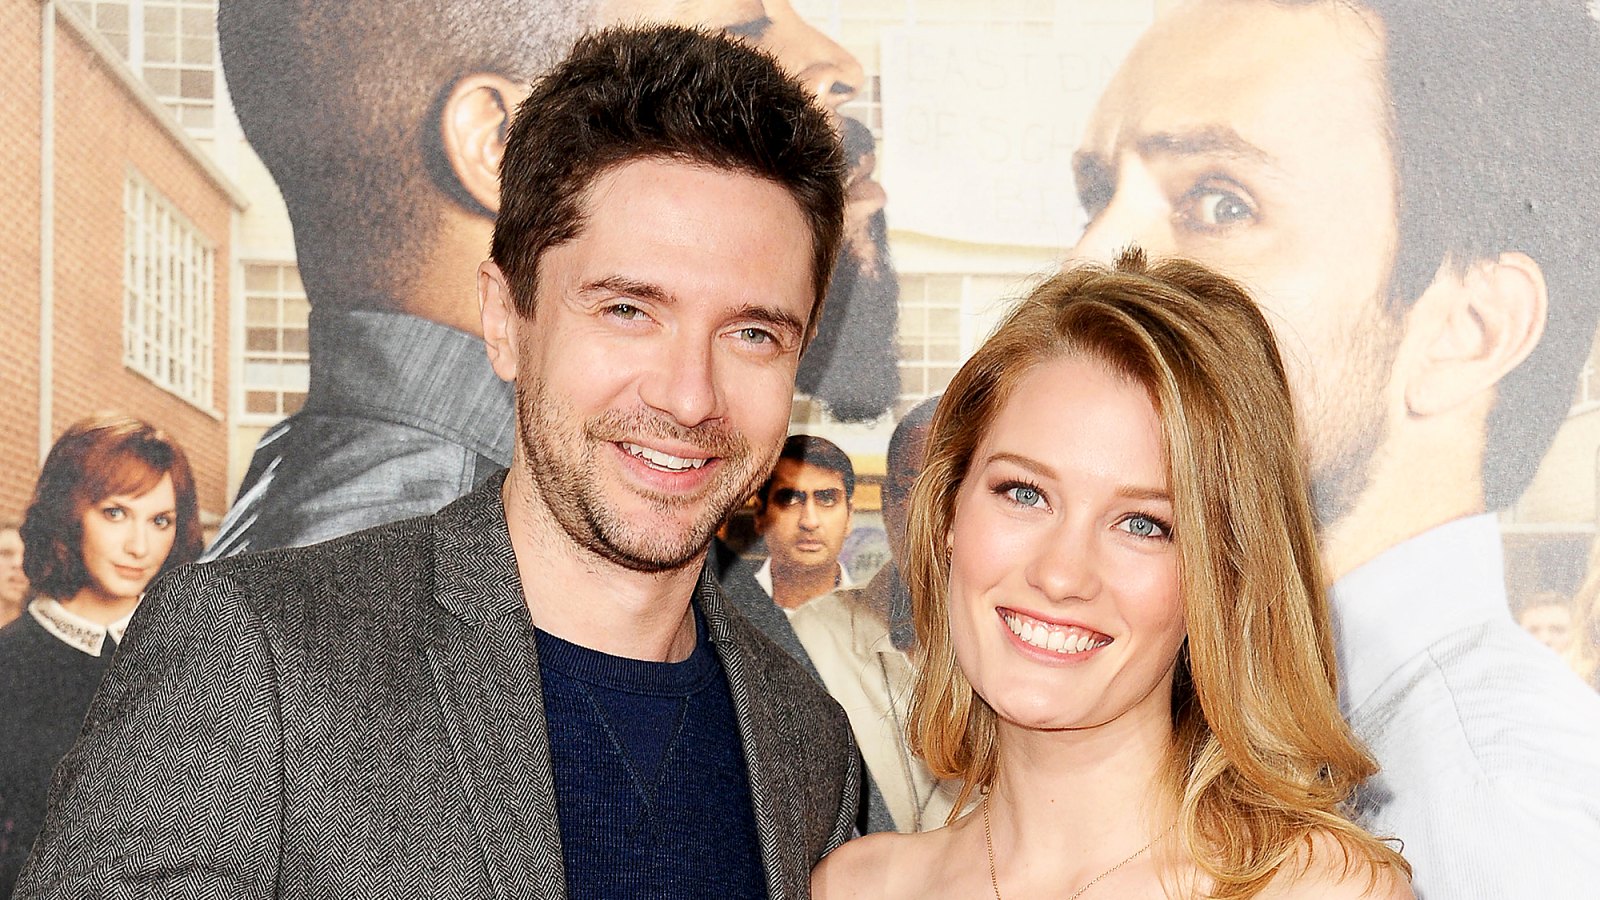 Topher Grace and wife Ashley Hinshaw attend the premiere of "Fist Fight" at Regency Village Theatre on February 13, 2017 in Westwood, California.